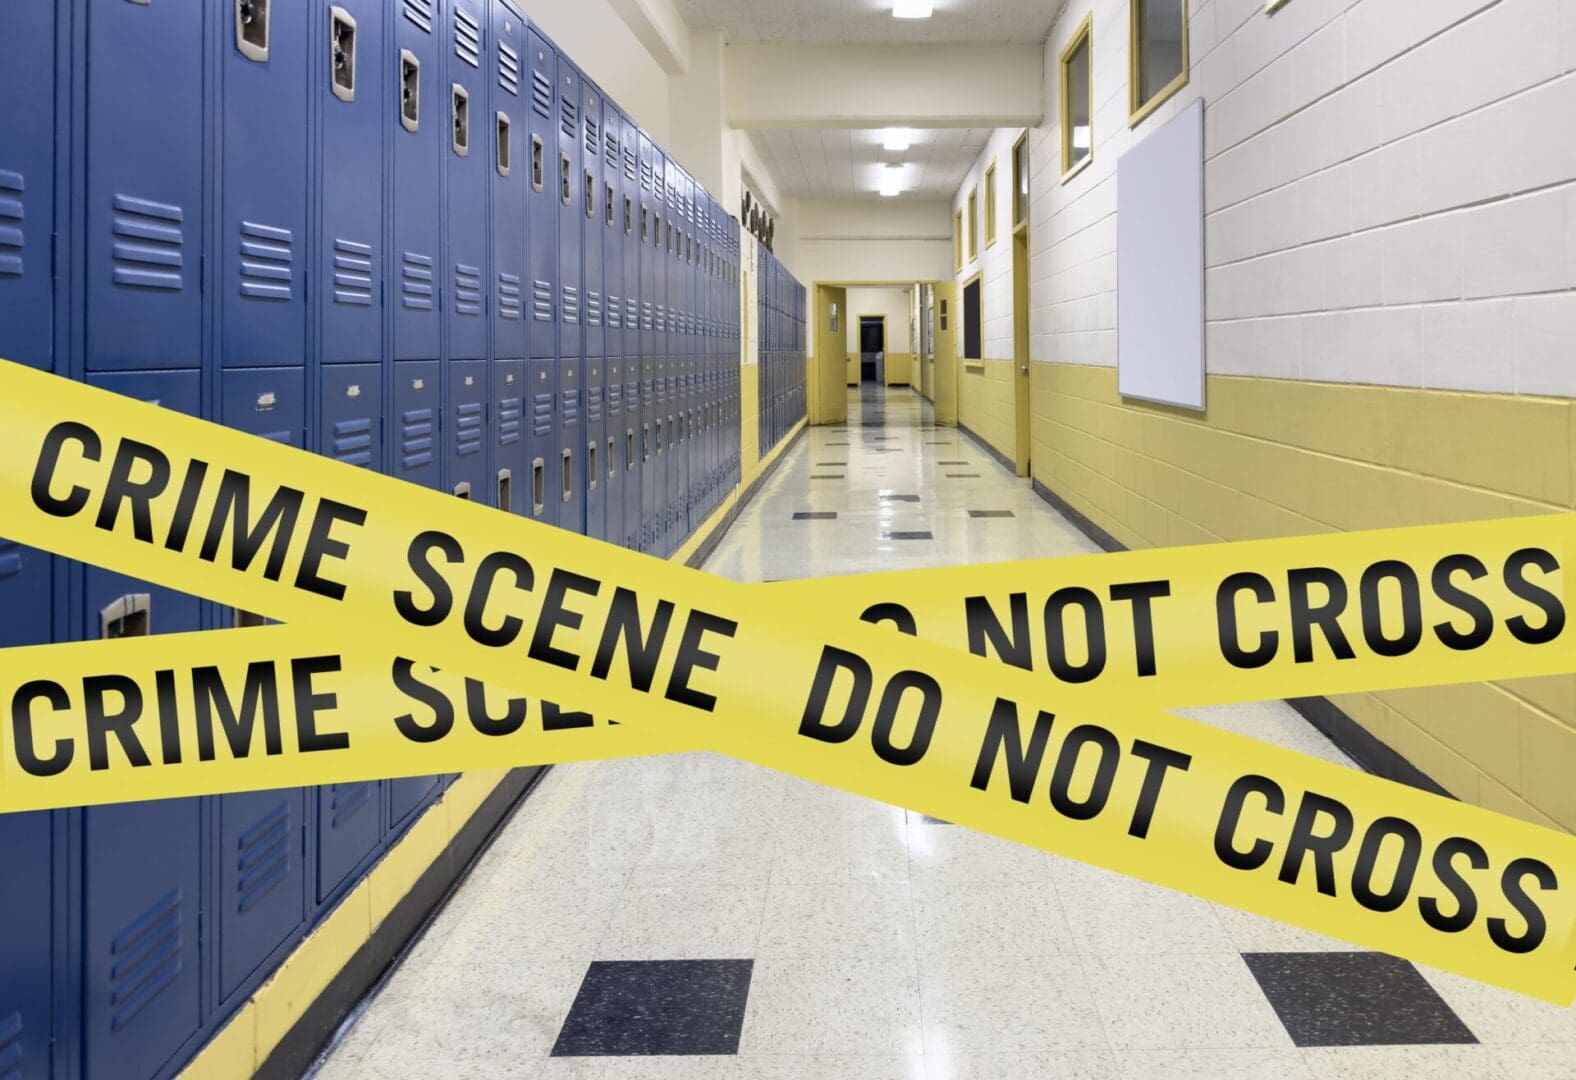 A hallway with blue lockers and yellow tape.